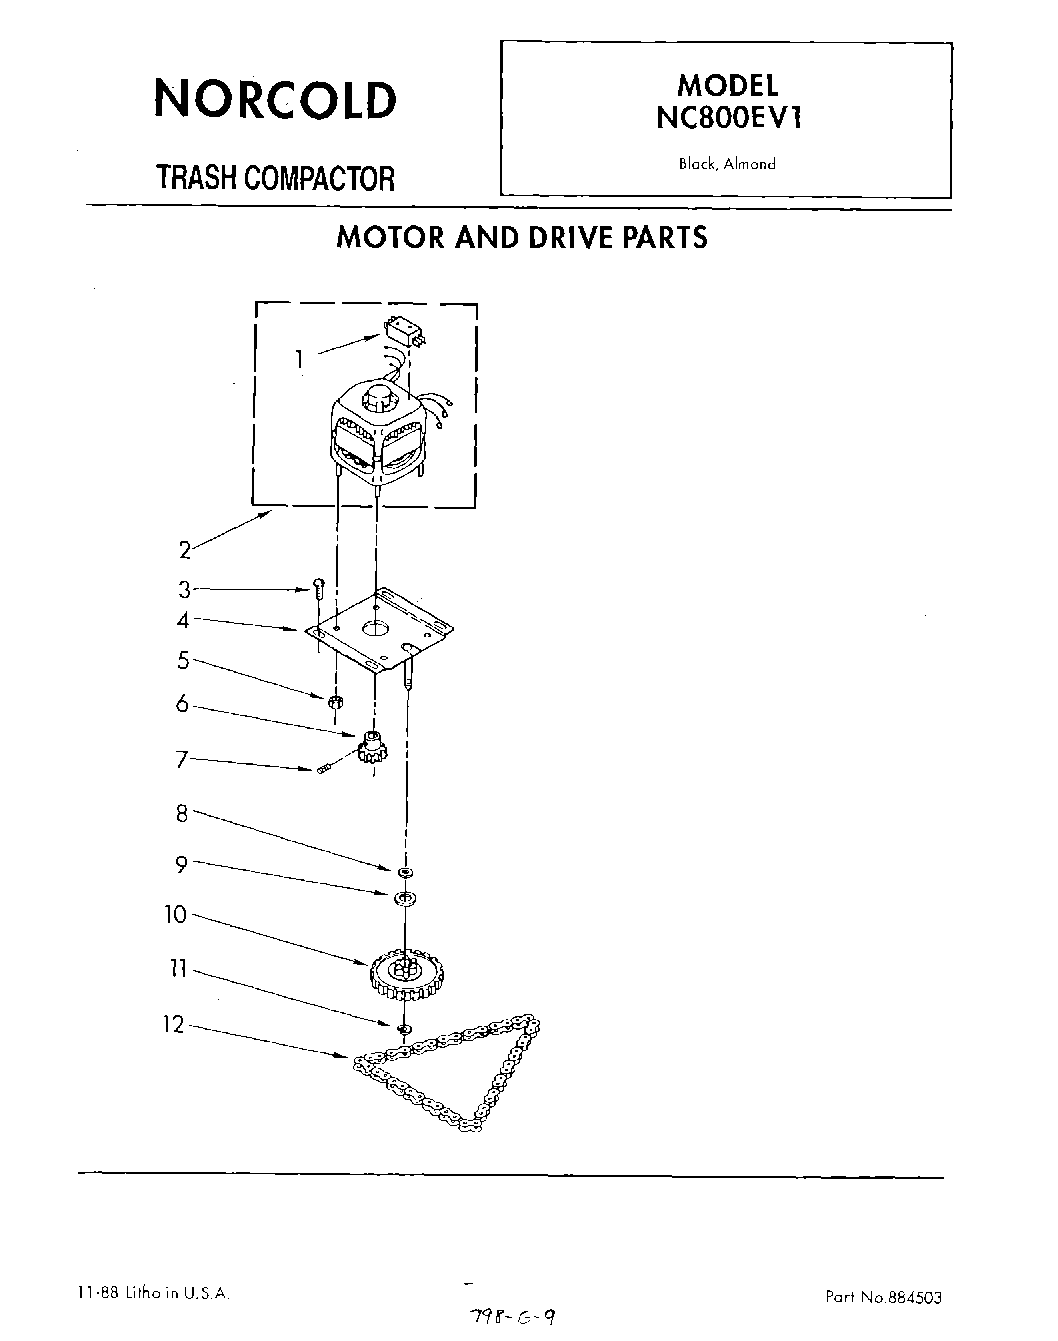 01 - MOTOR AND DRIVE , LITERATURE